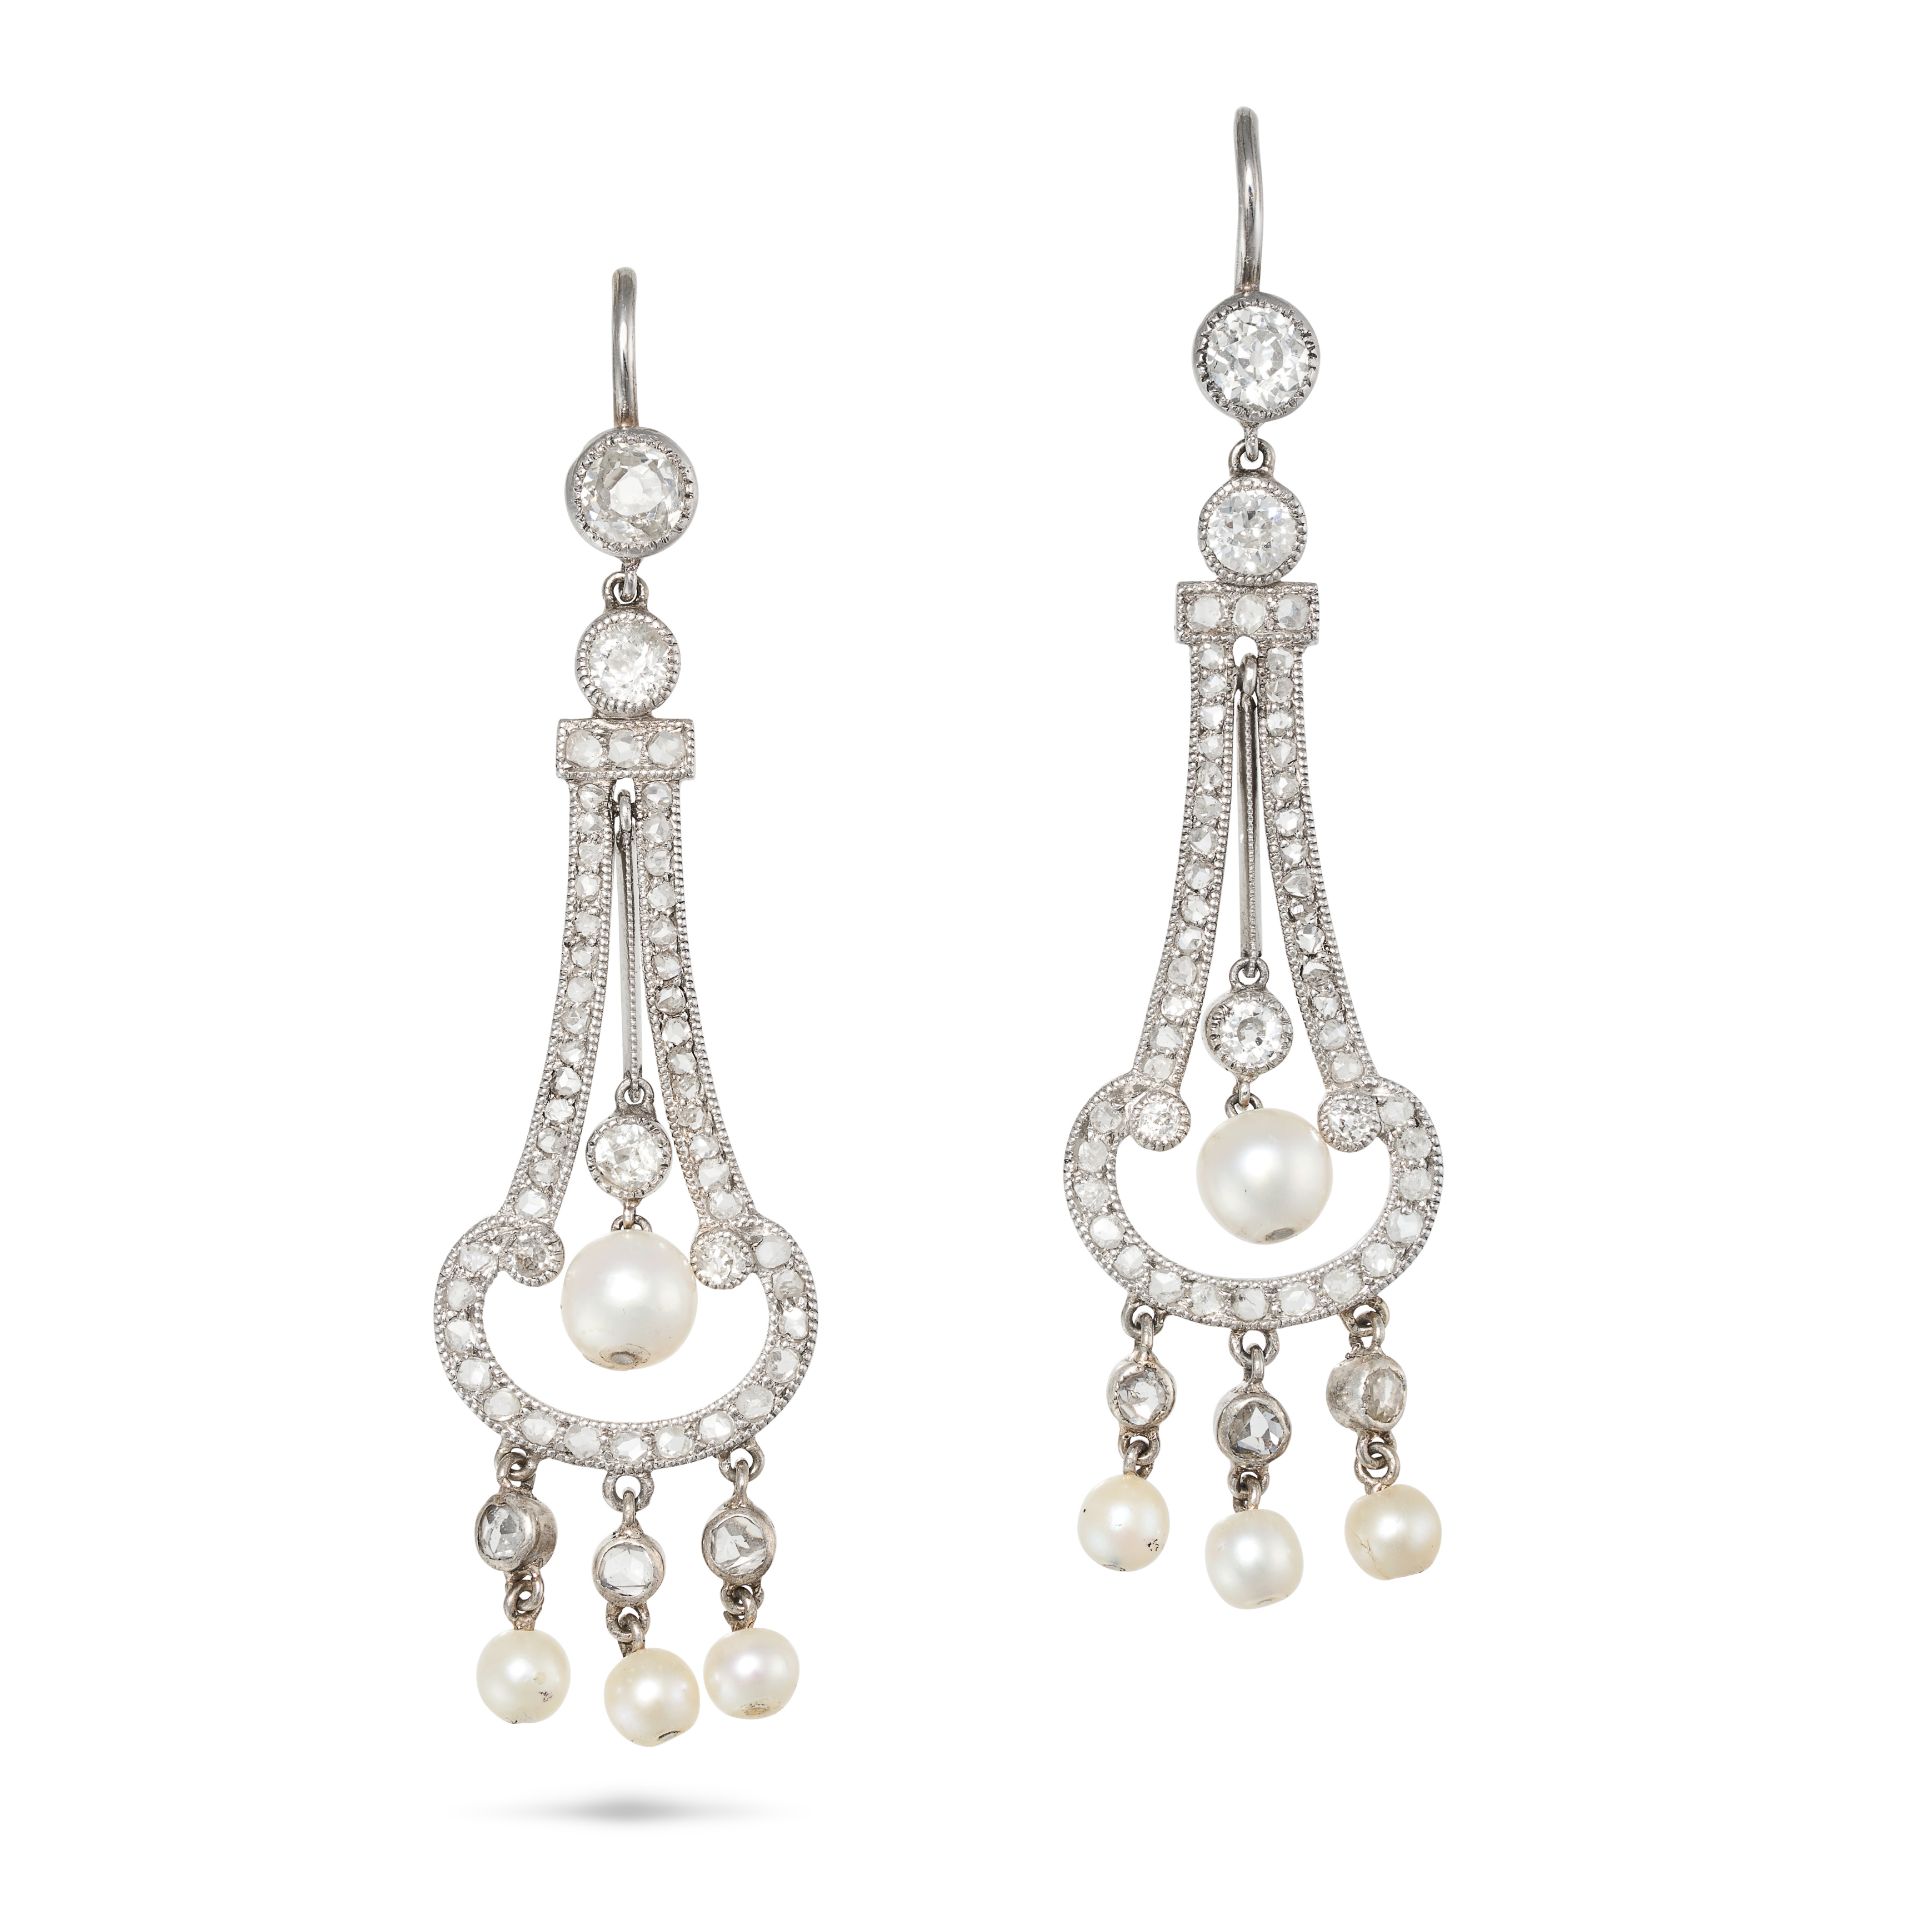 A PAIR OF PEARL AND DIAMOND DROP EARRINGS in white gold and platinum, each set with an old cut di...